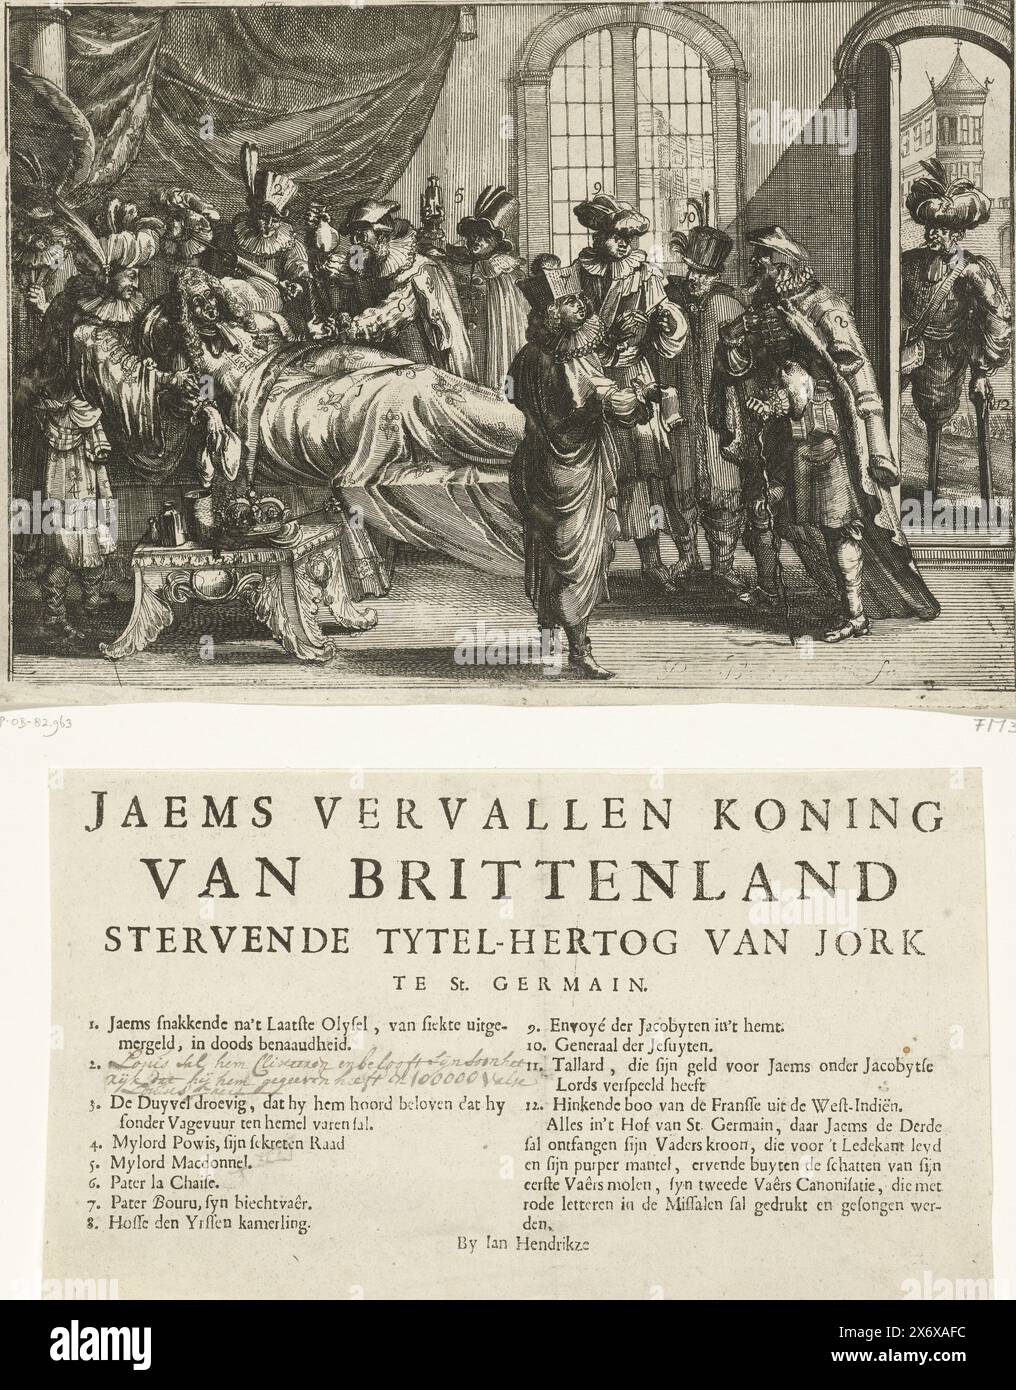 Cartoon on the death of James II, 1701, Jaem's fallen king of Brittenland dying Tytel-Duke of Jork in St. Germain (title on object), King James II on his deathbed, December 16, 1701. Doctors and courtiers stand around the bed of the king, on the left a Turkish physician and Louis XIV with an enema syringe to purge the king. To the right of the bed, a group of courtiers, including confessor Father Bouru, discusses the situation. On the right in the doorway a French messenger from the West Indies, with turban, wooden leg and crutch. Print and a text sheet with the title and legend 1-12., print Stock Photo